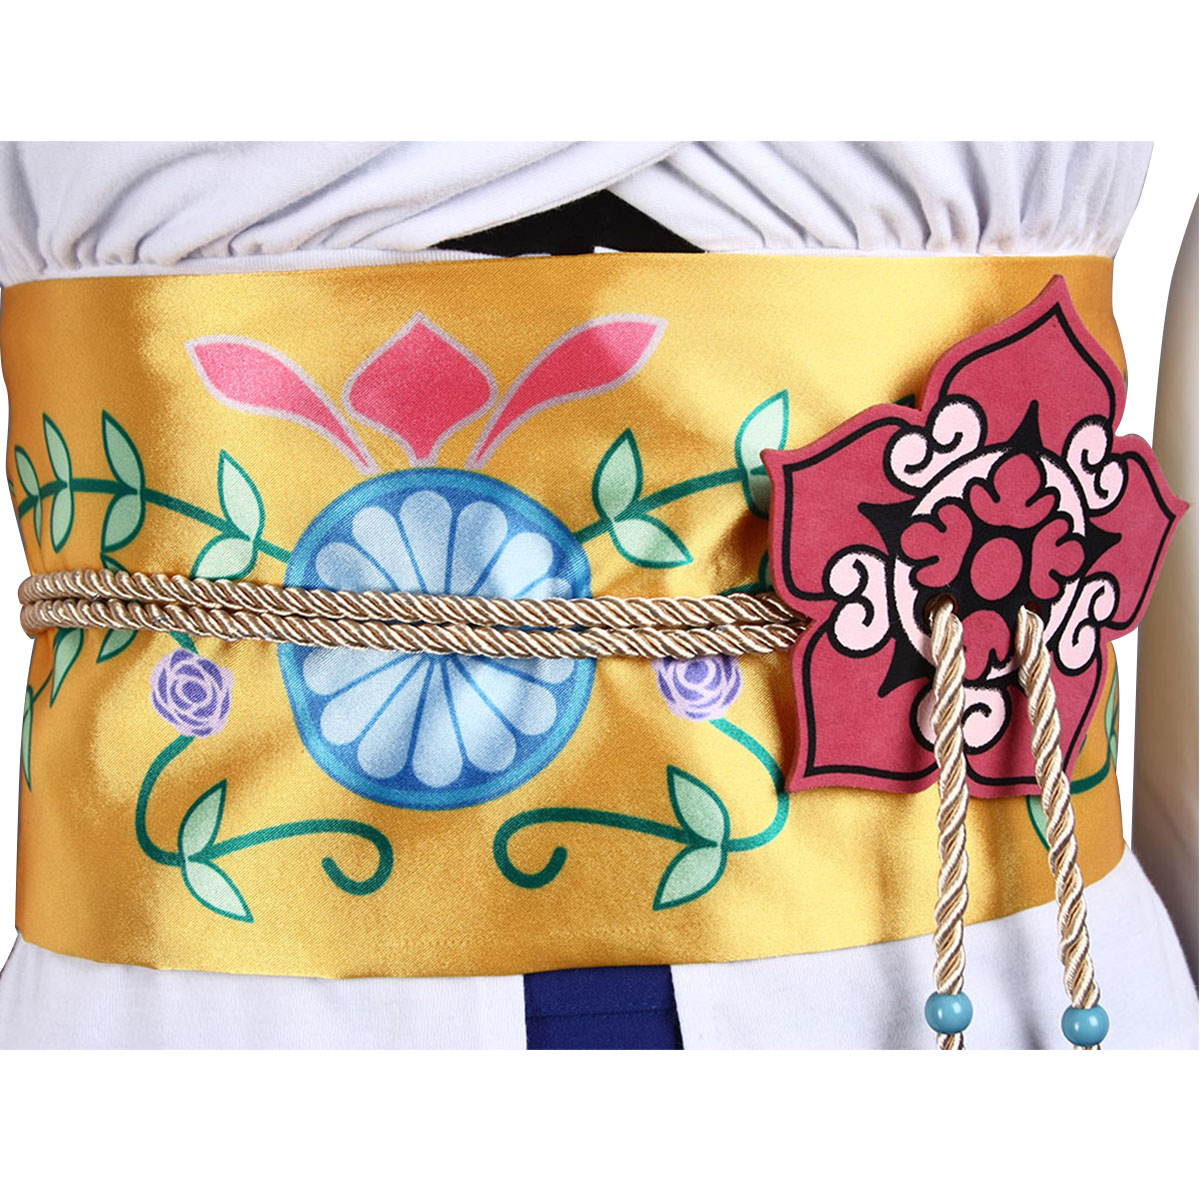 Final Fantasy X Yuna 1 Anime Cosplay Costumes Outfit